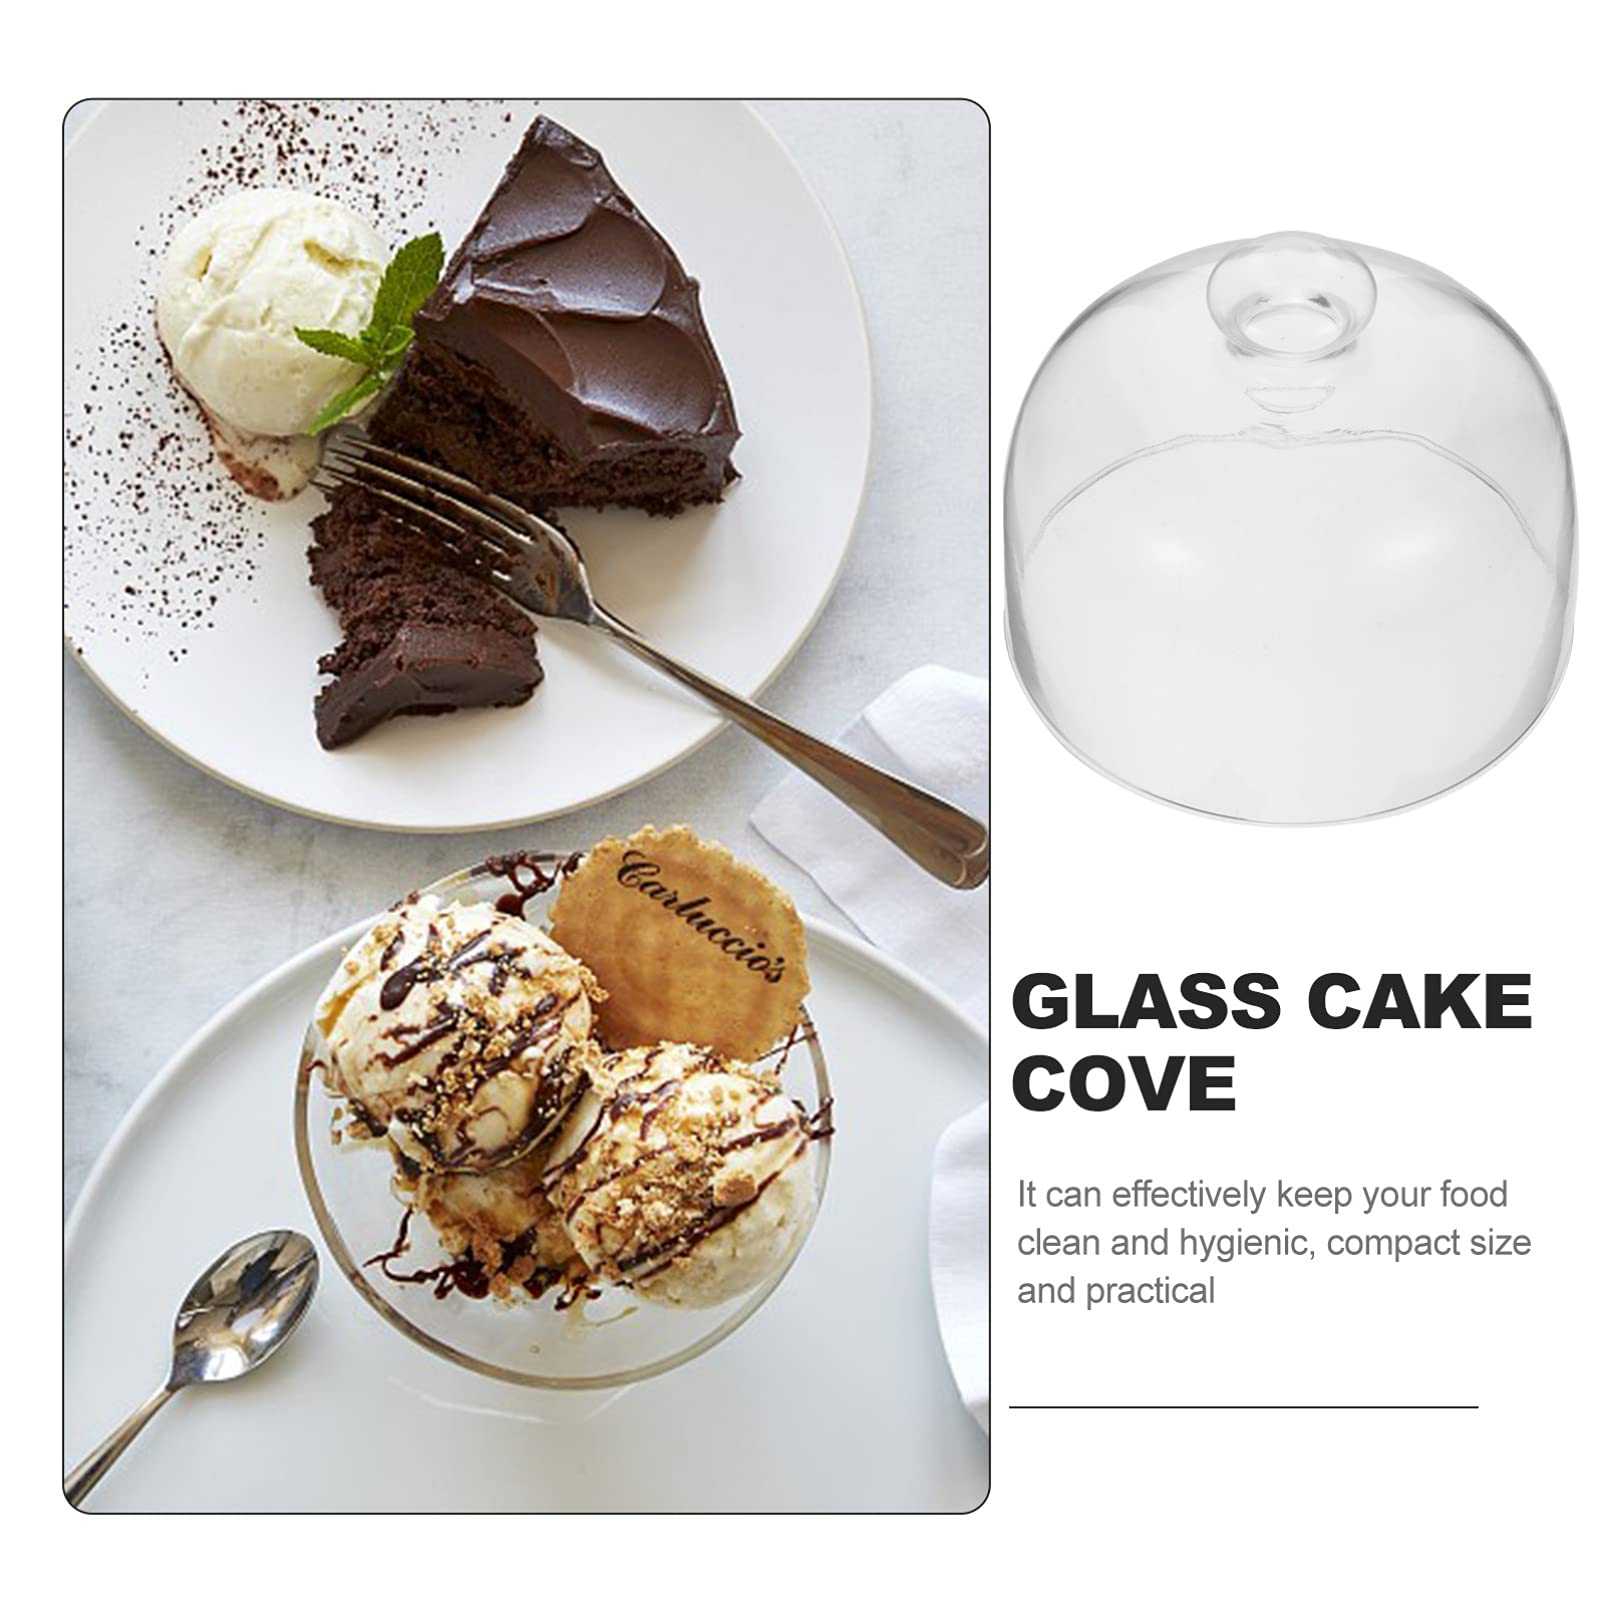 BESPORTBLE Glass Cake Dome Glass Round Cake Cover Food Plate Lid Clear Dust- Proof Cover for Home Baking Cake Dessert Display Platter Cover